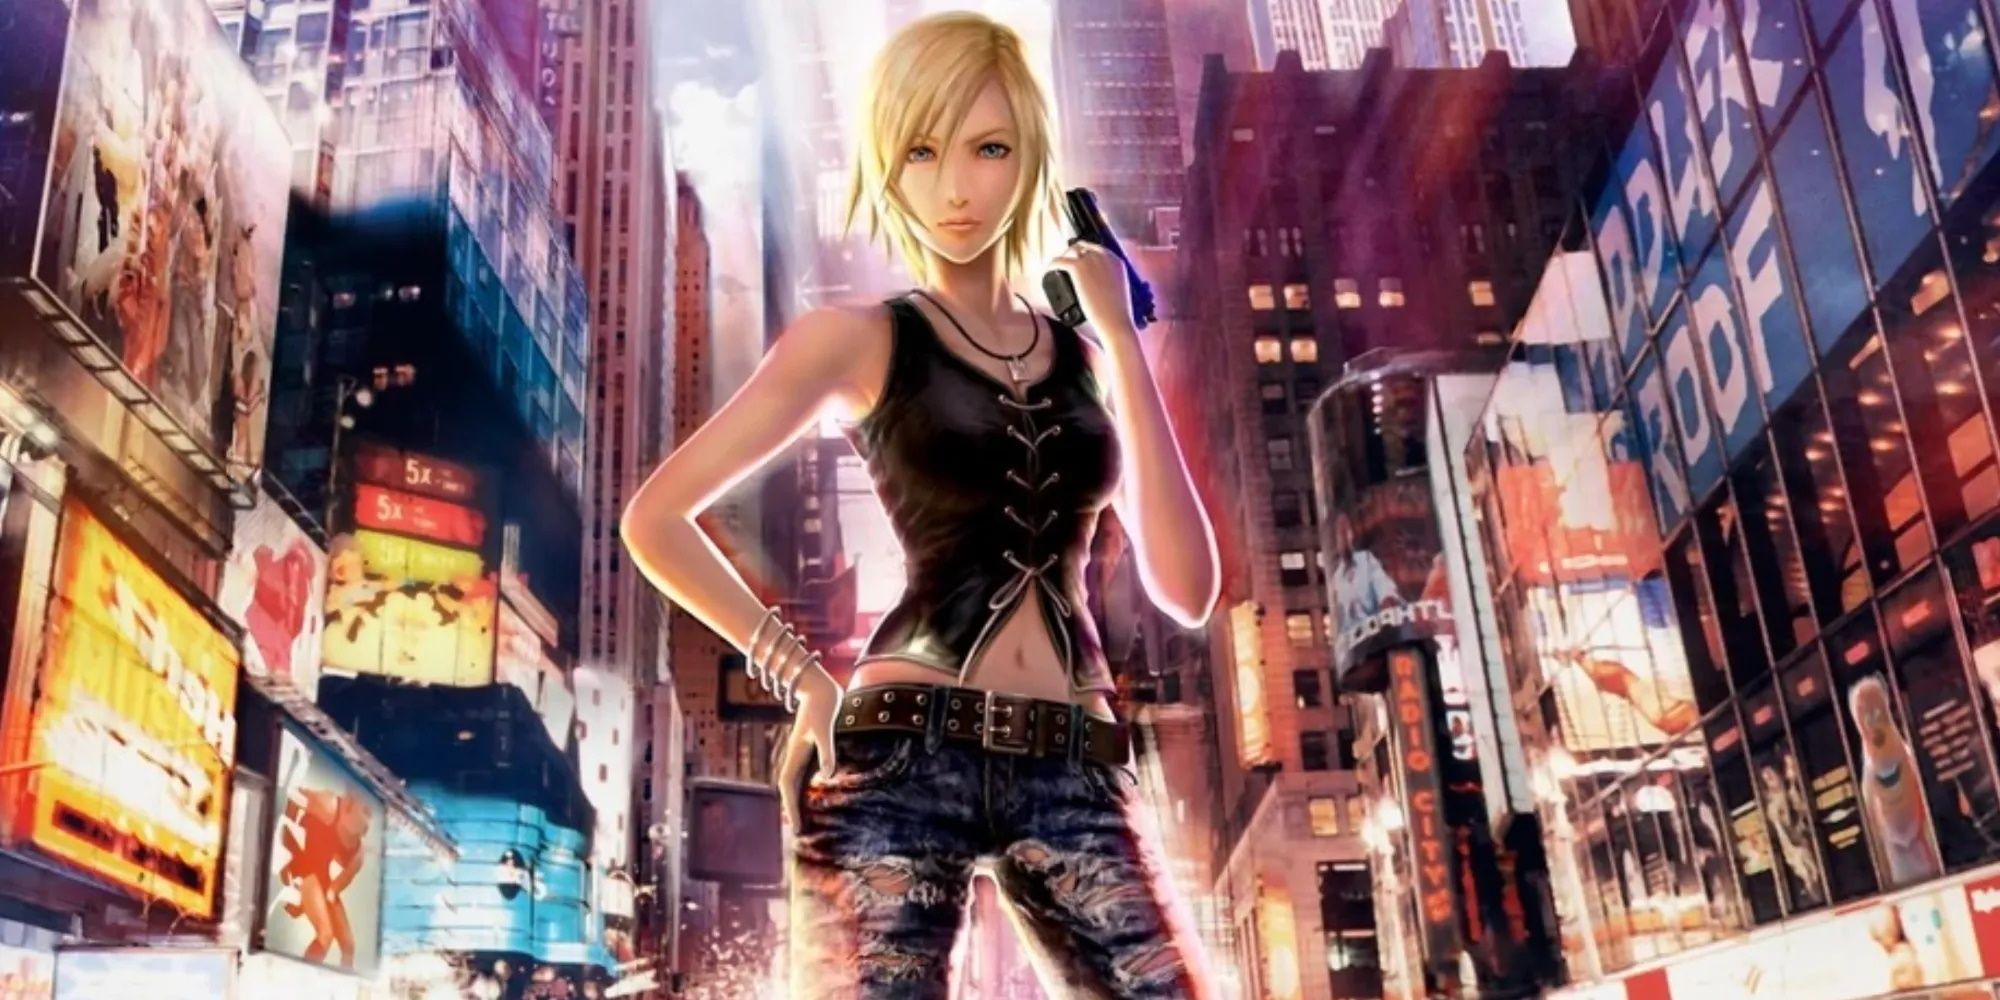 Symbiogensis Isn't a New Parasite Eve Game but an NFT Collectible Art  Project, Square Enix Reveals